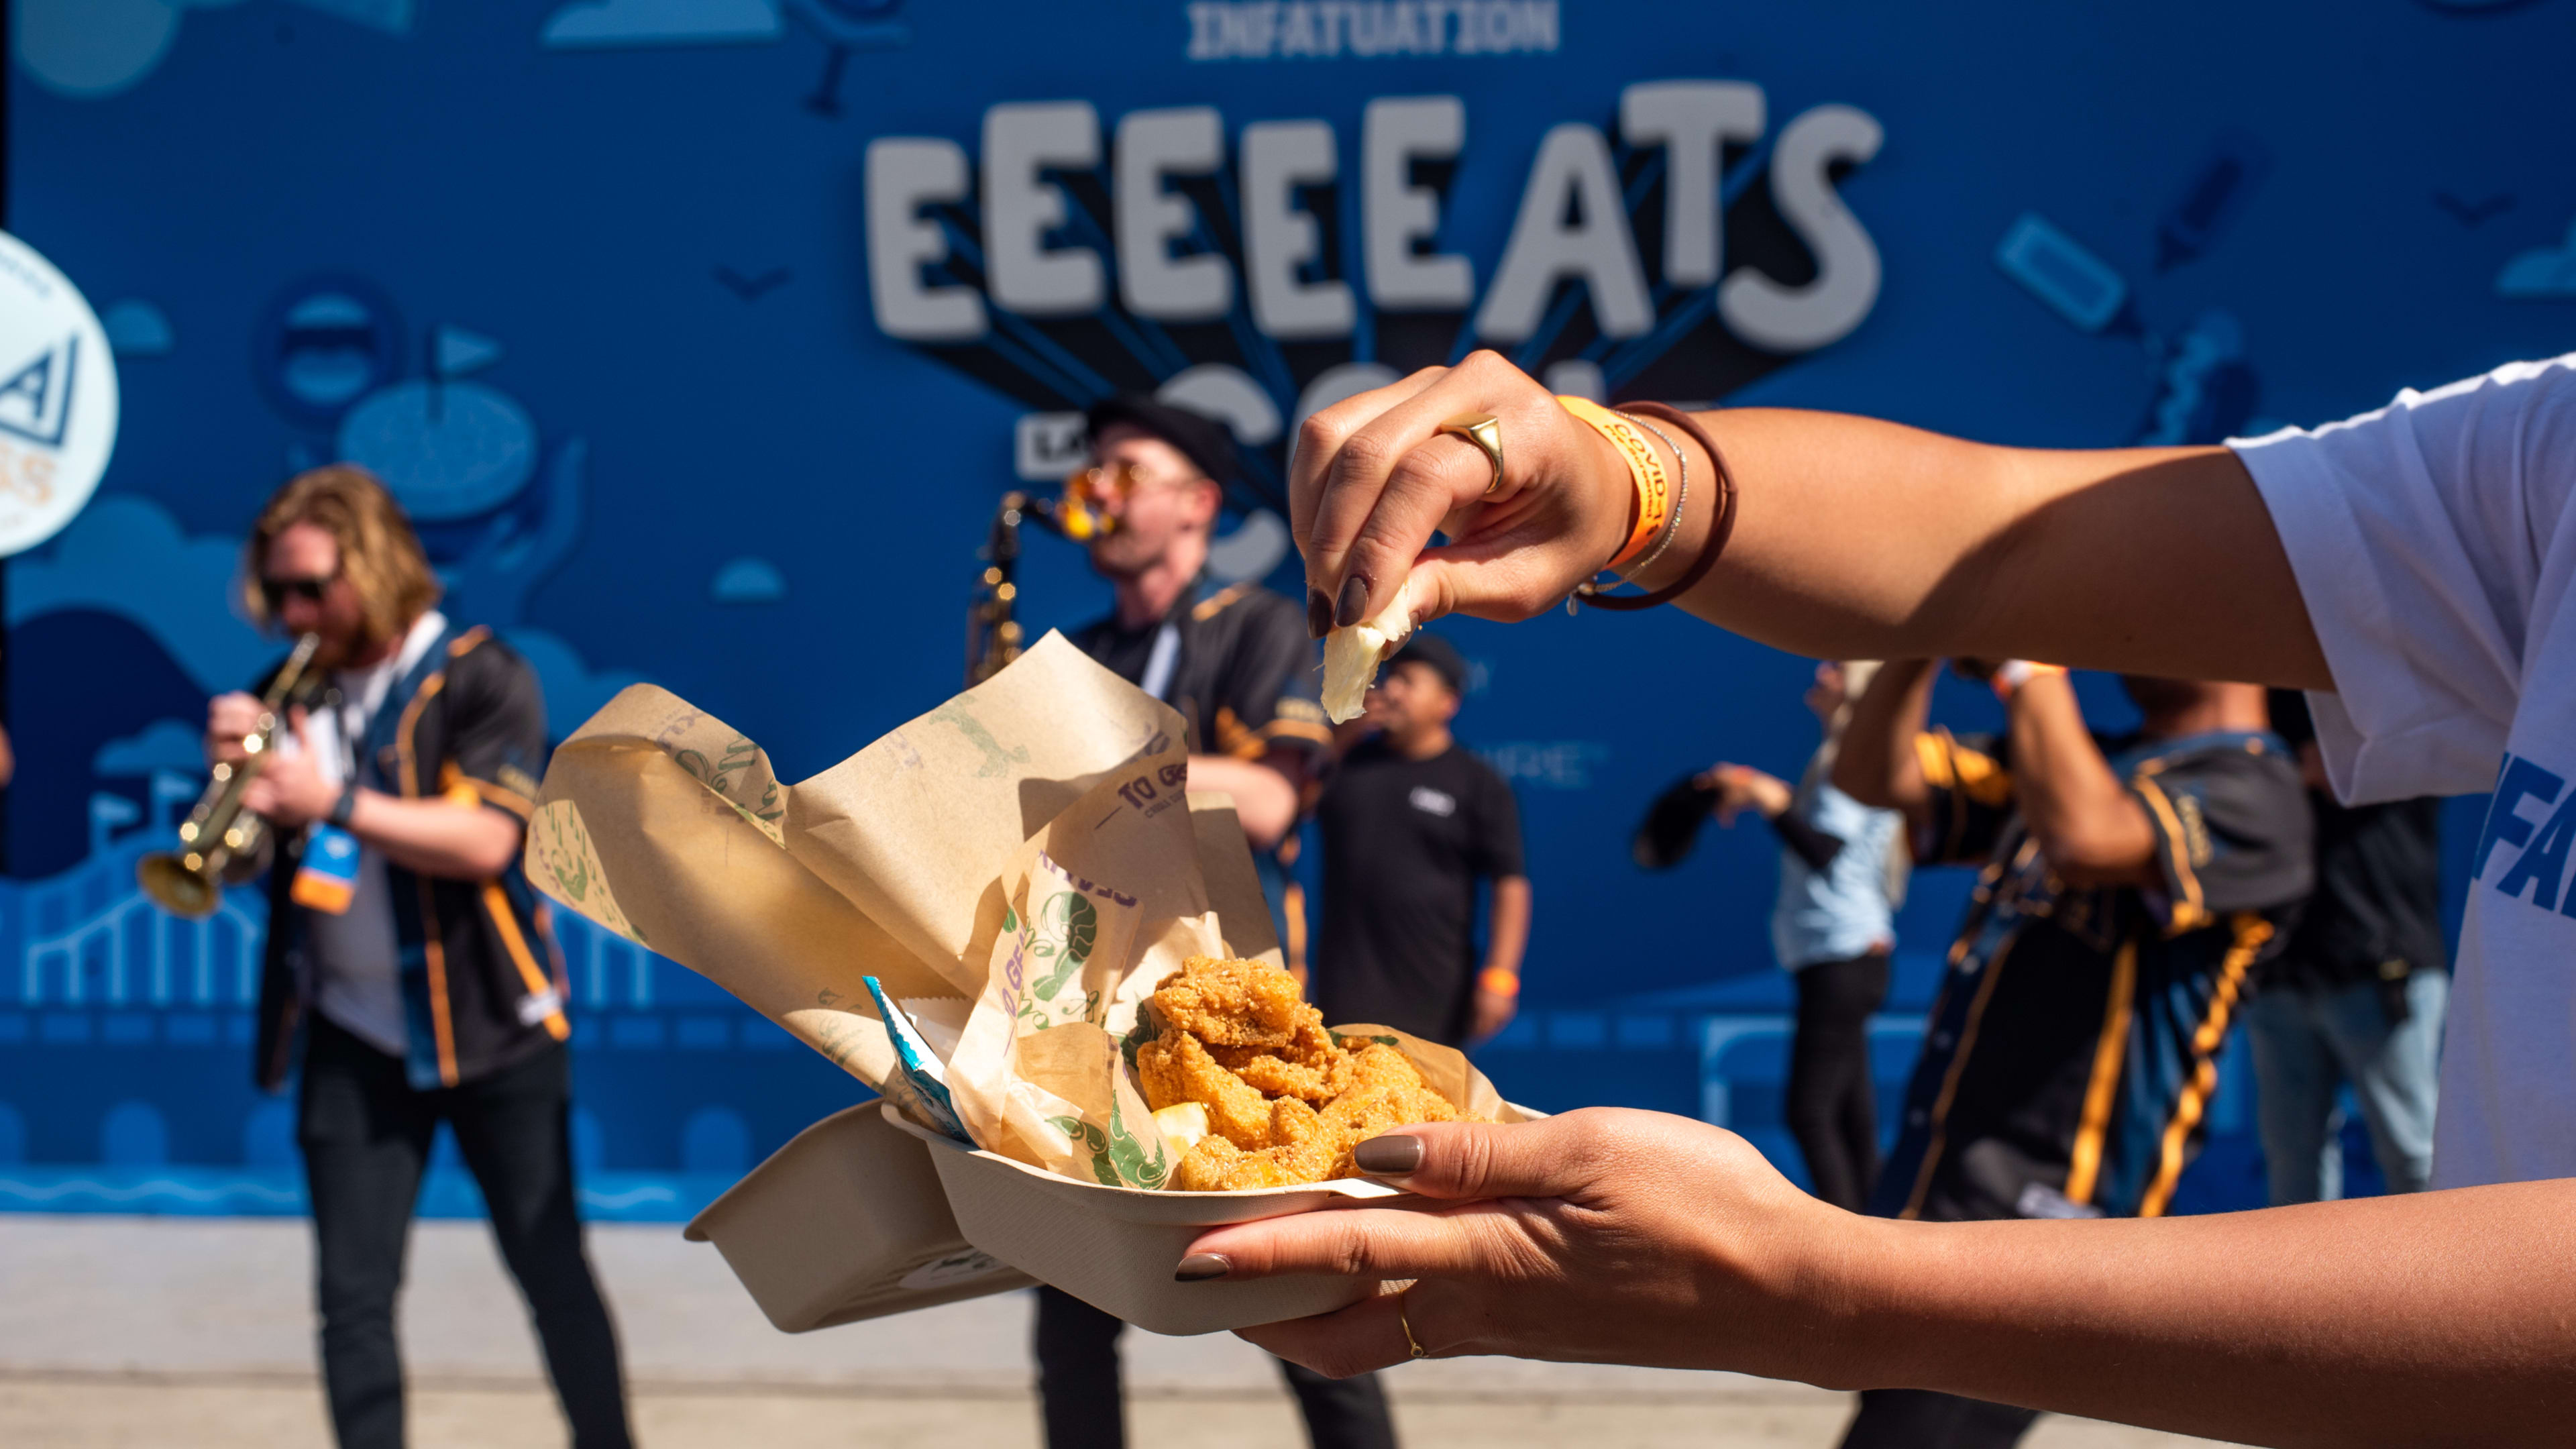 Hand holding a fry above a basket of fries in front of an Eeeeeatscon banner